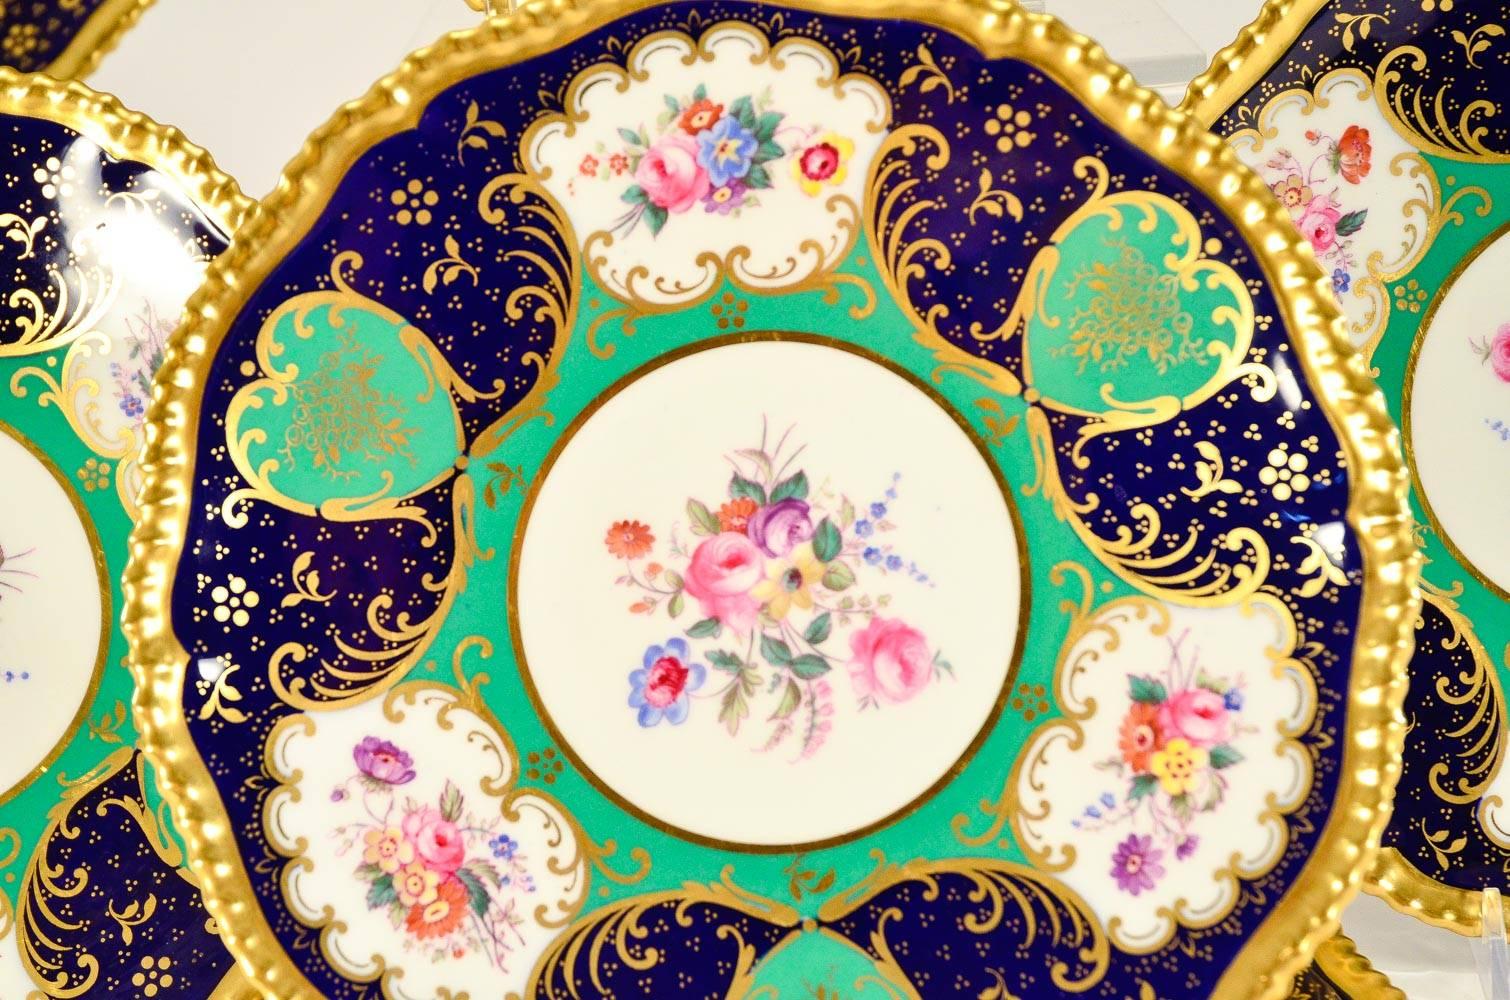 This set of 12 Spode Copelands, Sevres style dessert plates combine all the best features of both design and practicality. The combination of Classic Sevres green with cobalt blue, hand-painted floral reserves and gilded highlights, creates a